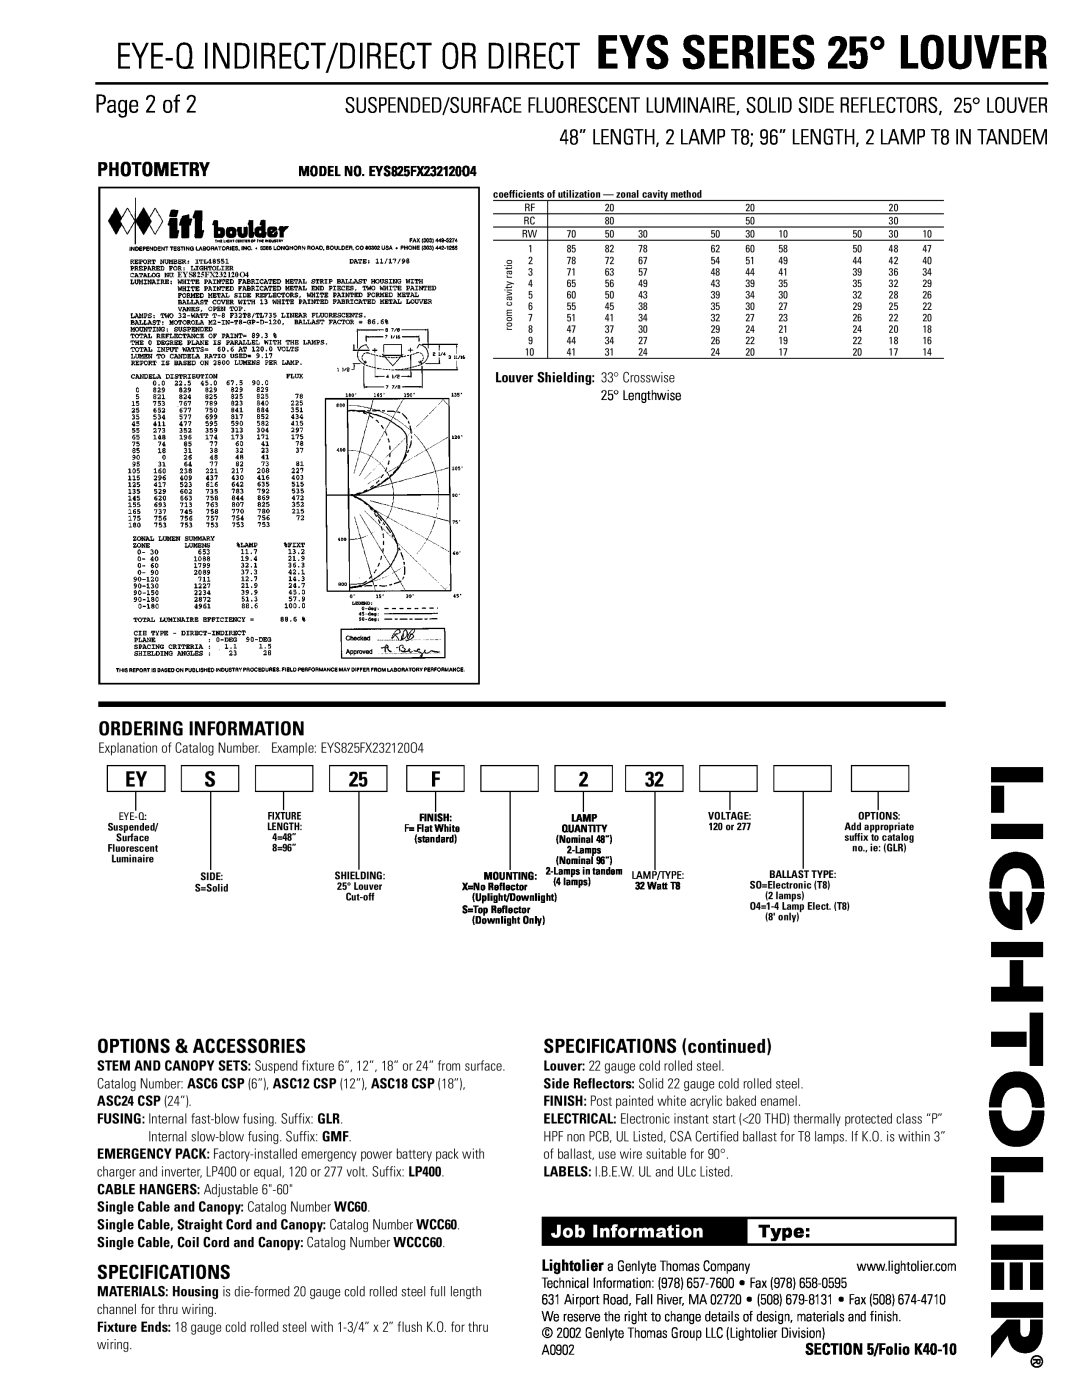 Lightolier EYS Series Page 2 of, Photometry, Ordering Information, Options & Accessories, Specifications, Job Information 